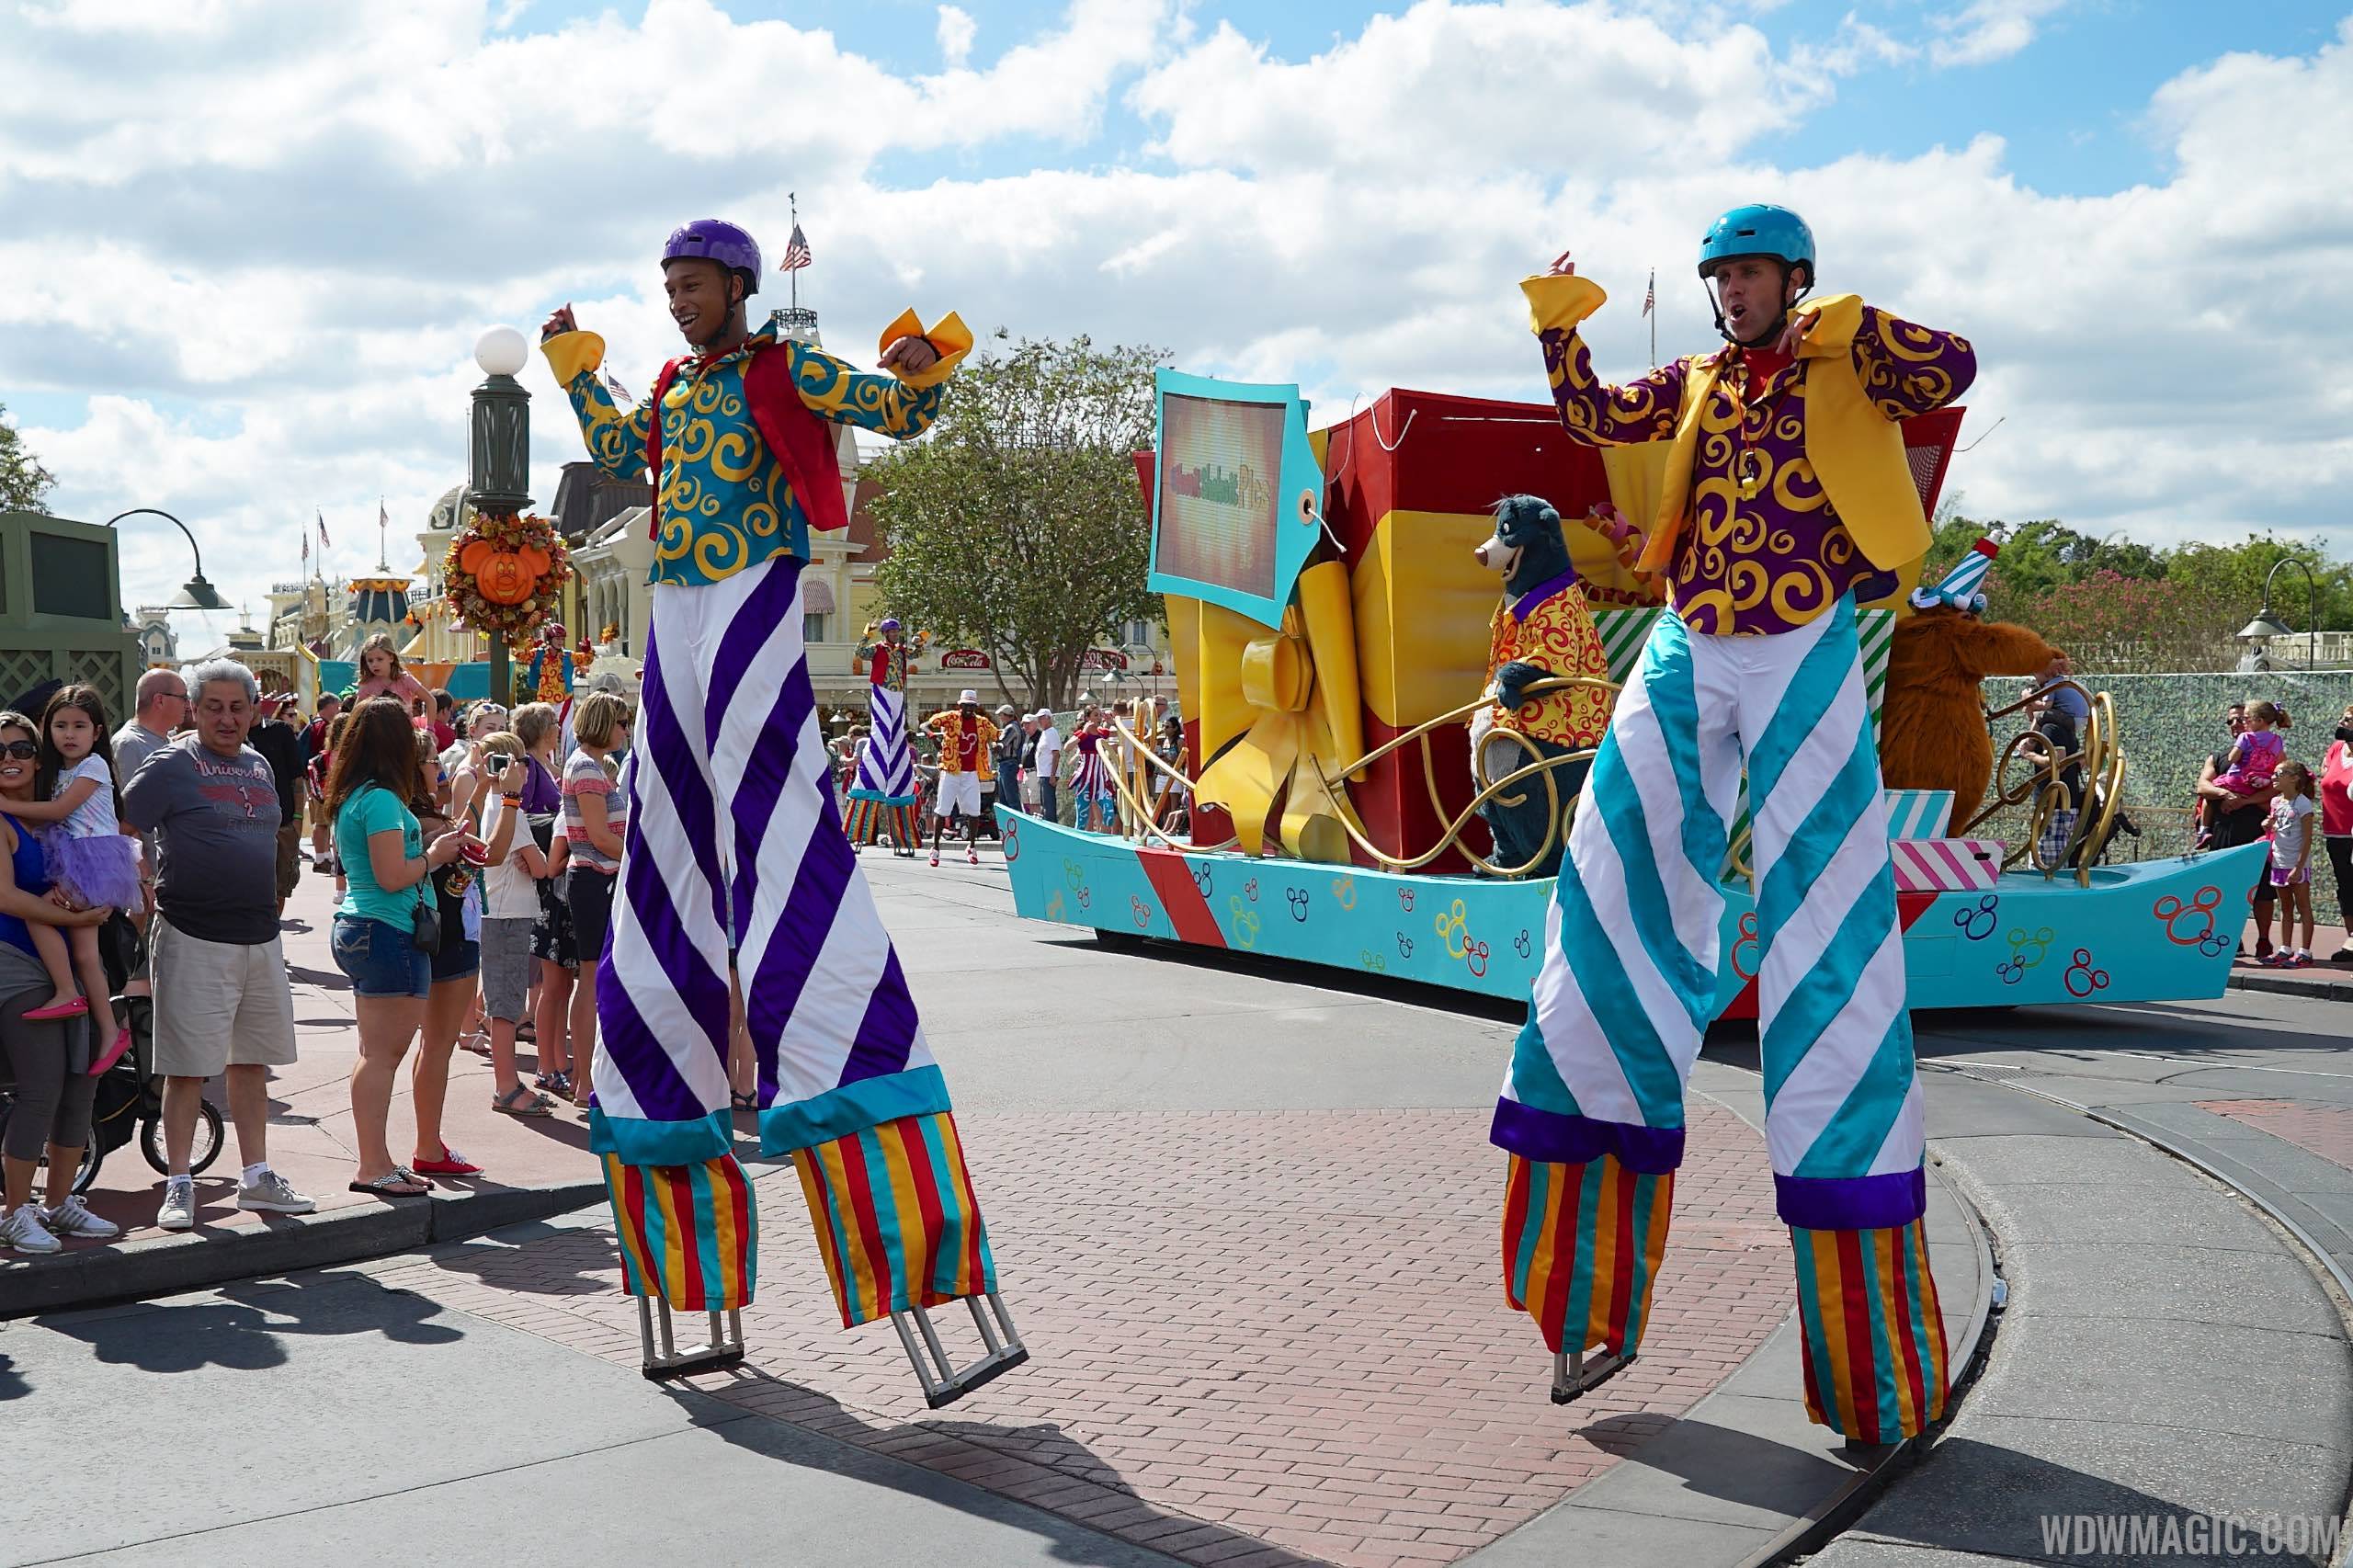 'Move It, Shake It, Celebrate It! Street Party' performances restricted to evenings only on select days next week